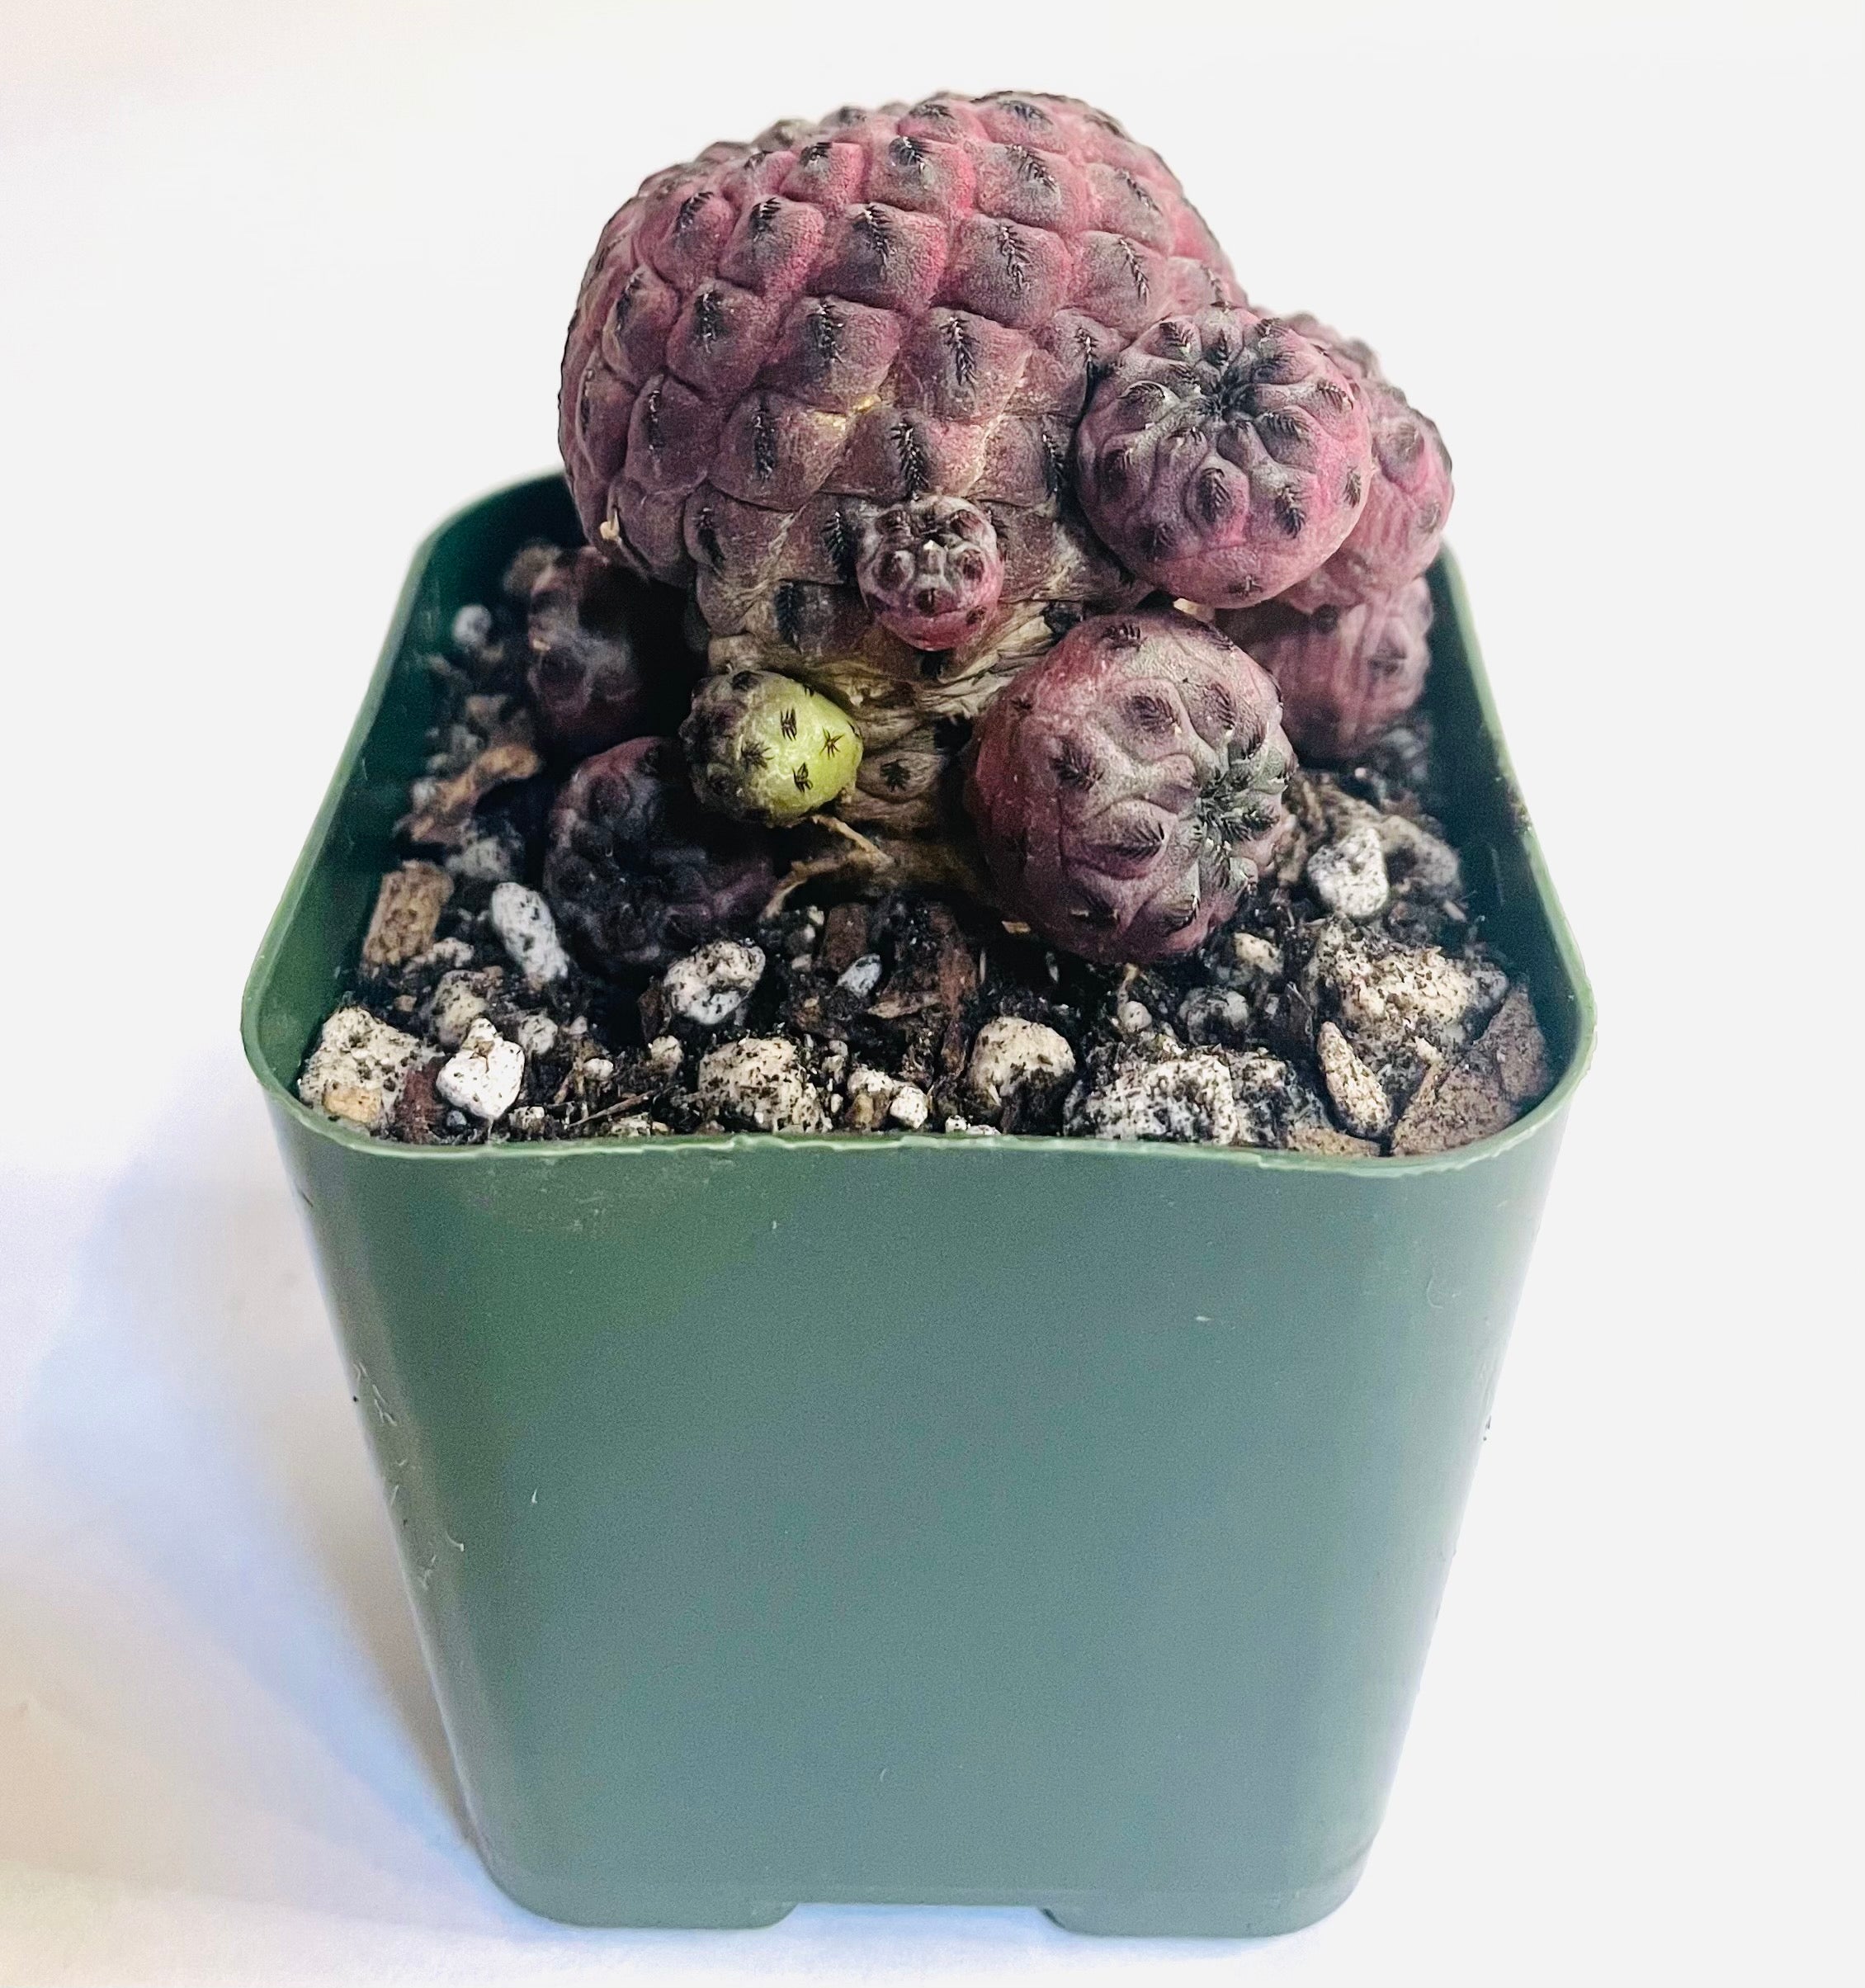 A closeup of a small red-violet cactus with small spines which hug the body closely. The main large central cactus is covered at its base by a cluster of smaller pups, which are identical in appearance other than their small size.